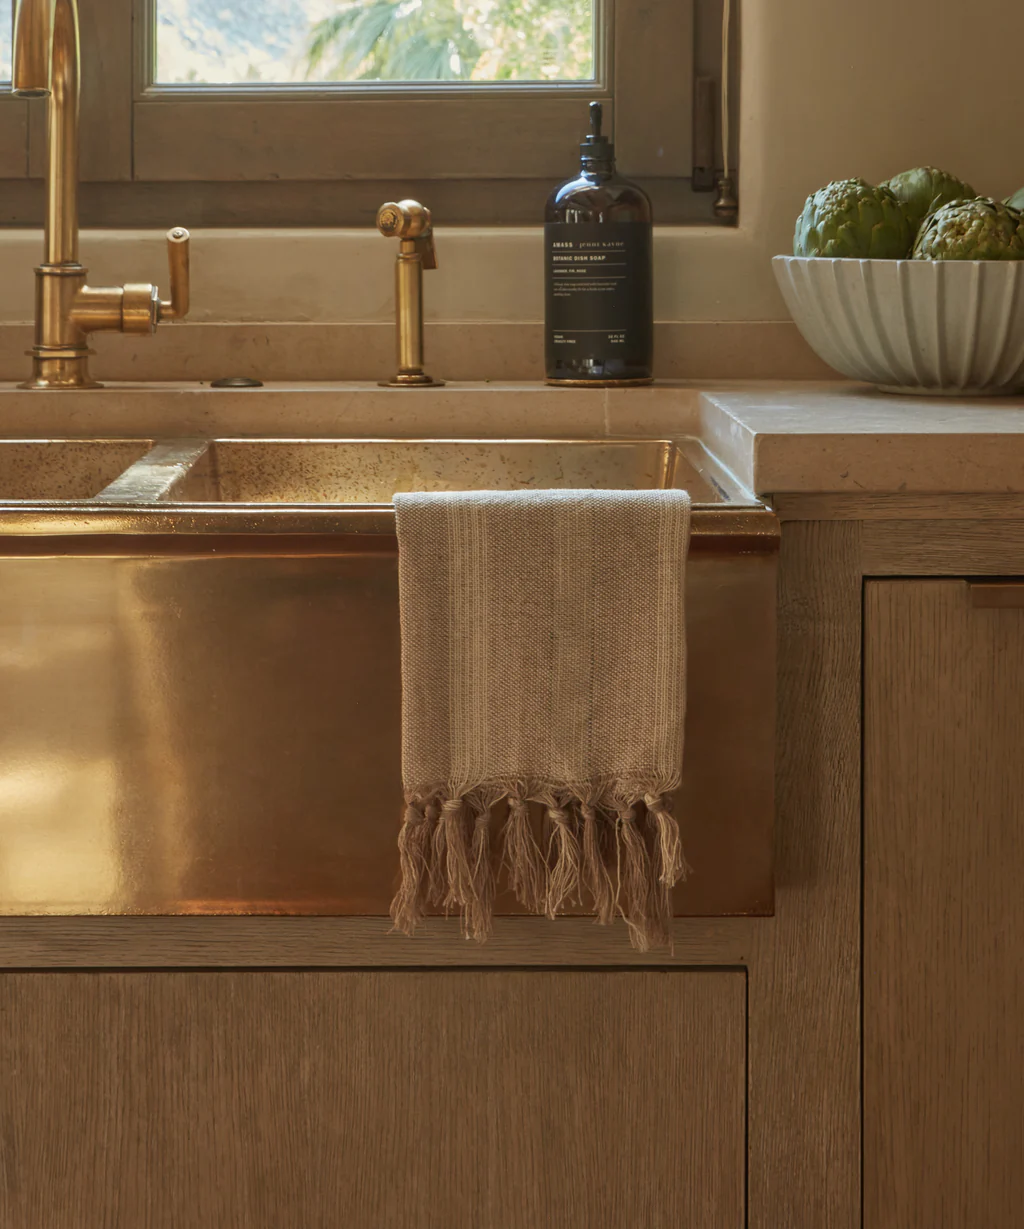 Laurel Hand Towel draped over apron front sink in beautiful warm kitchen with unlacquered brass faucet, Jenni Kayne Home. #linentowels #warmrusticmodern #californiacozy